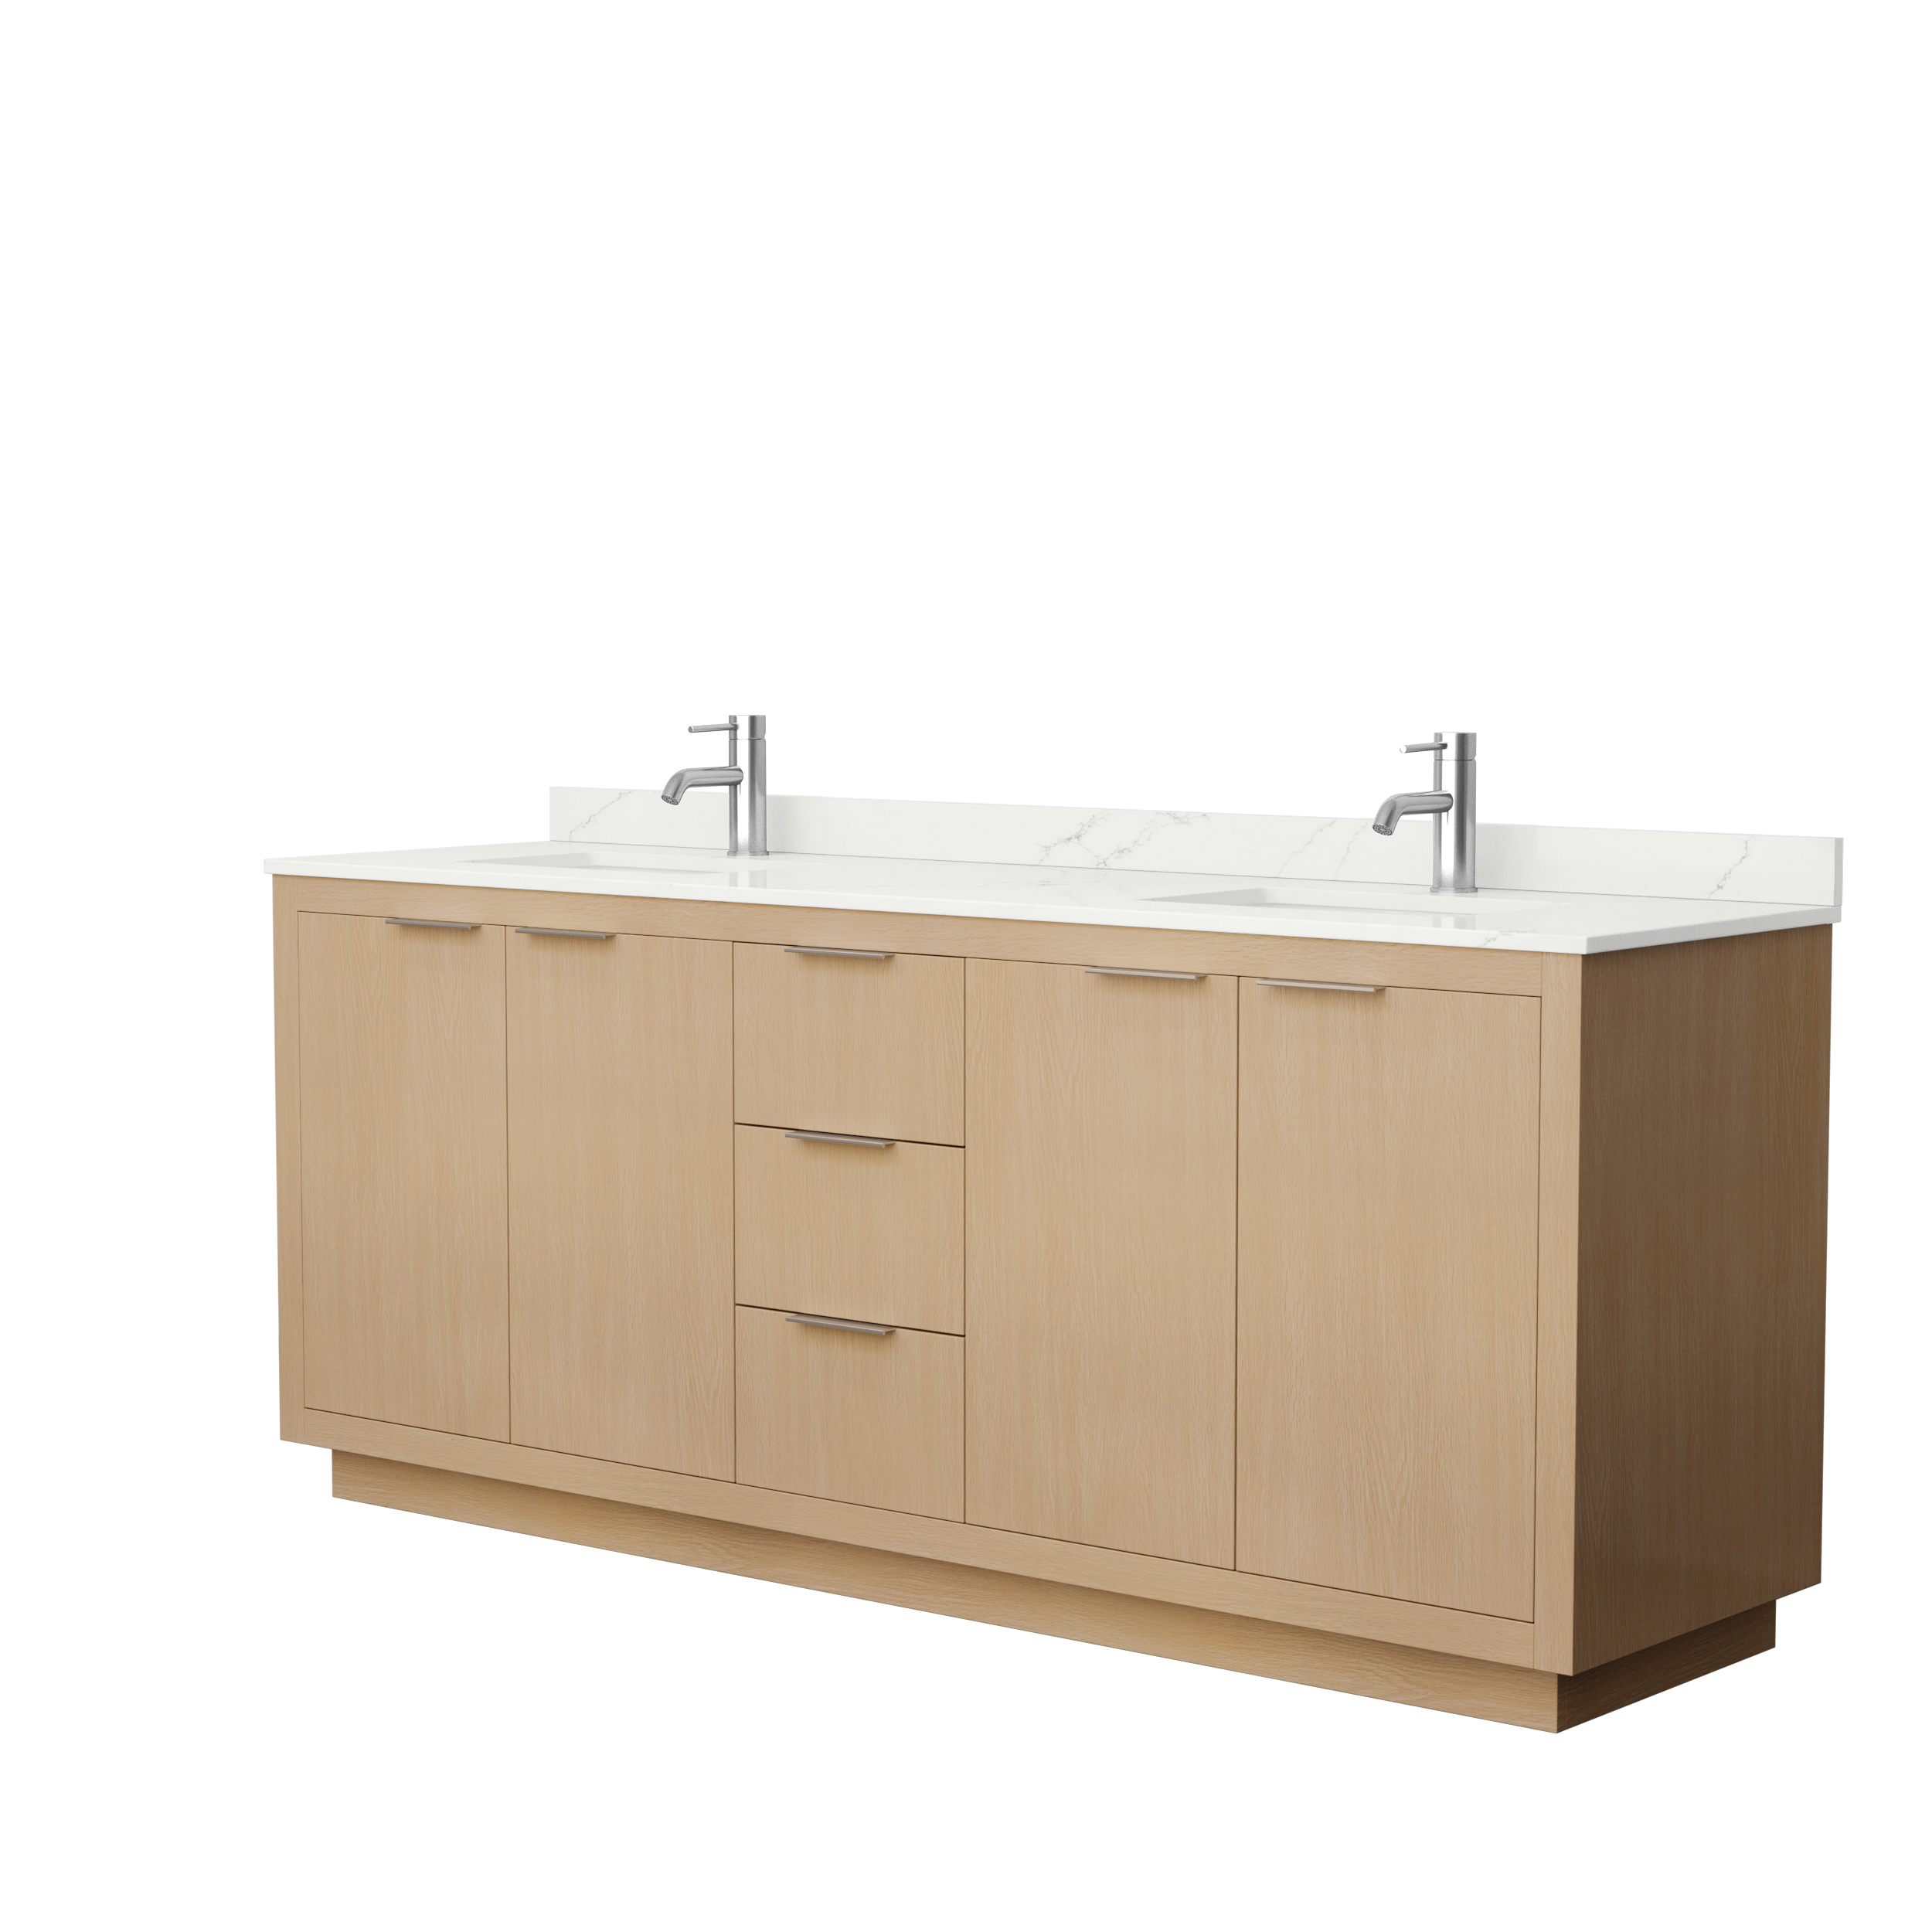 Maroni 80" Double Vanity with optional Quartz or Carrara Marble Counter - Light Straw WC-2828-80-DBL-VAN-LST--